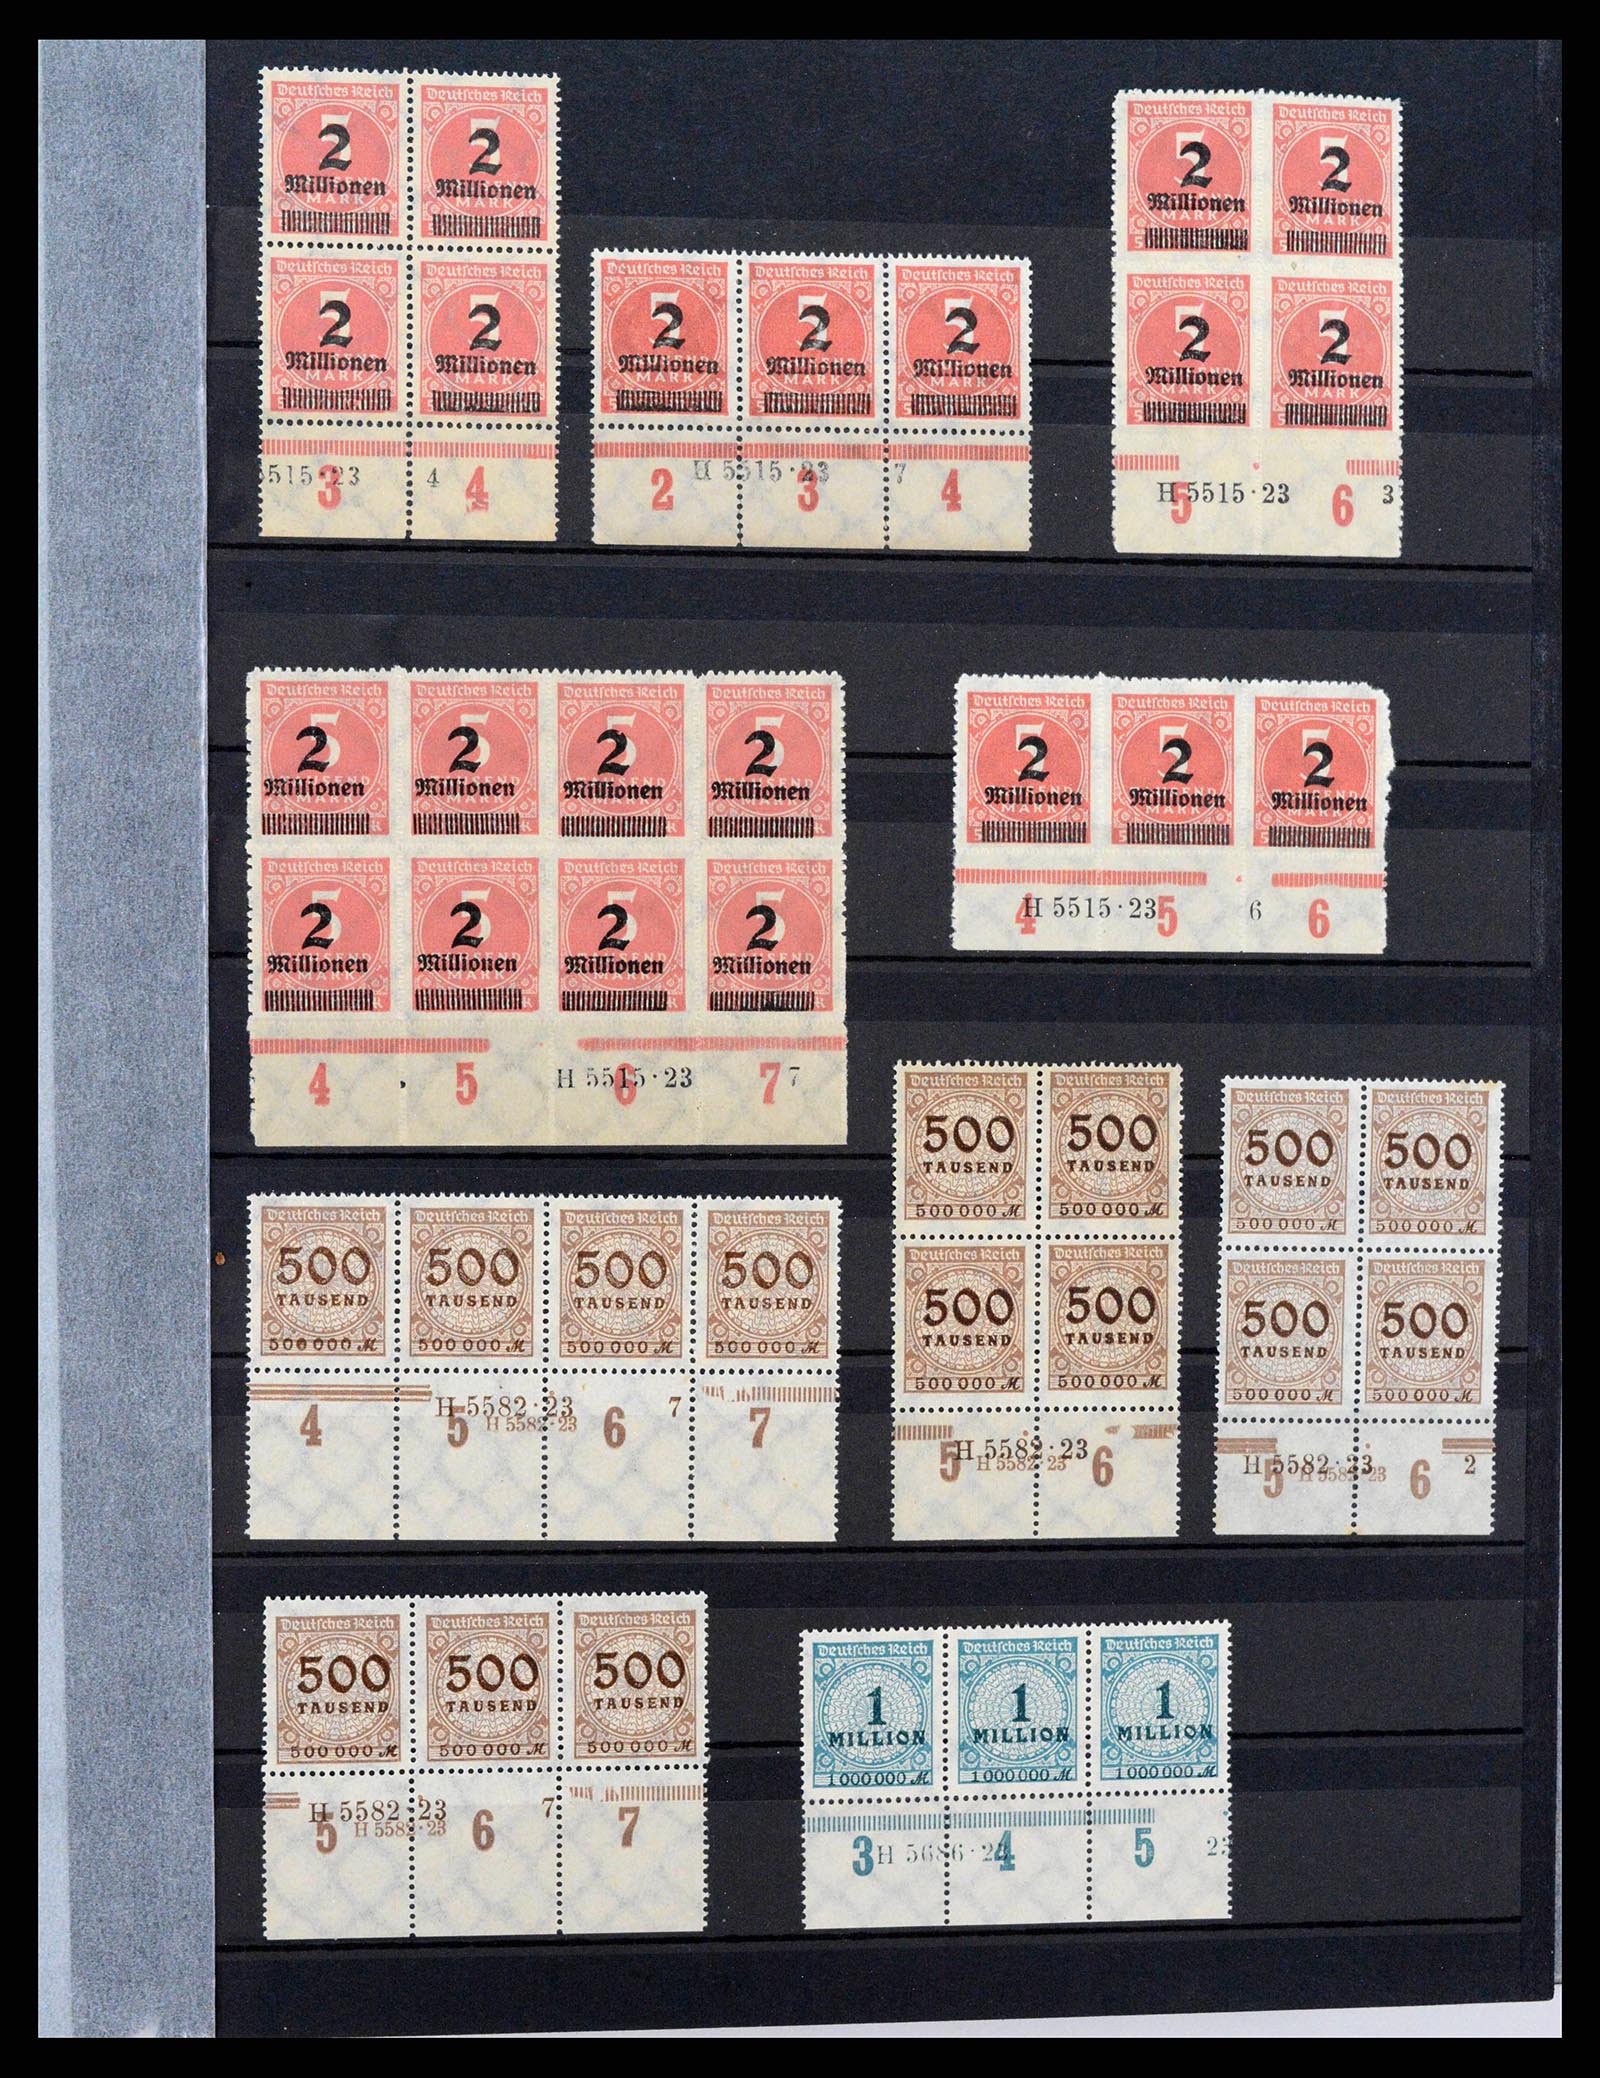 38417 0014 - Stamp collection 38417 German Reich infla 1922-1923.